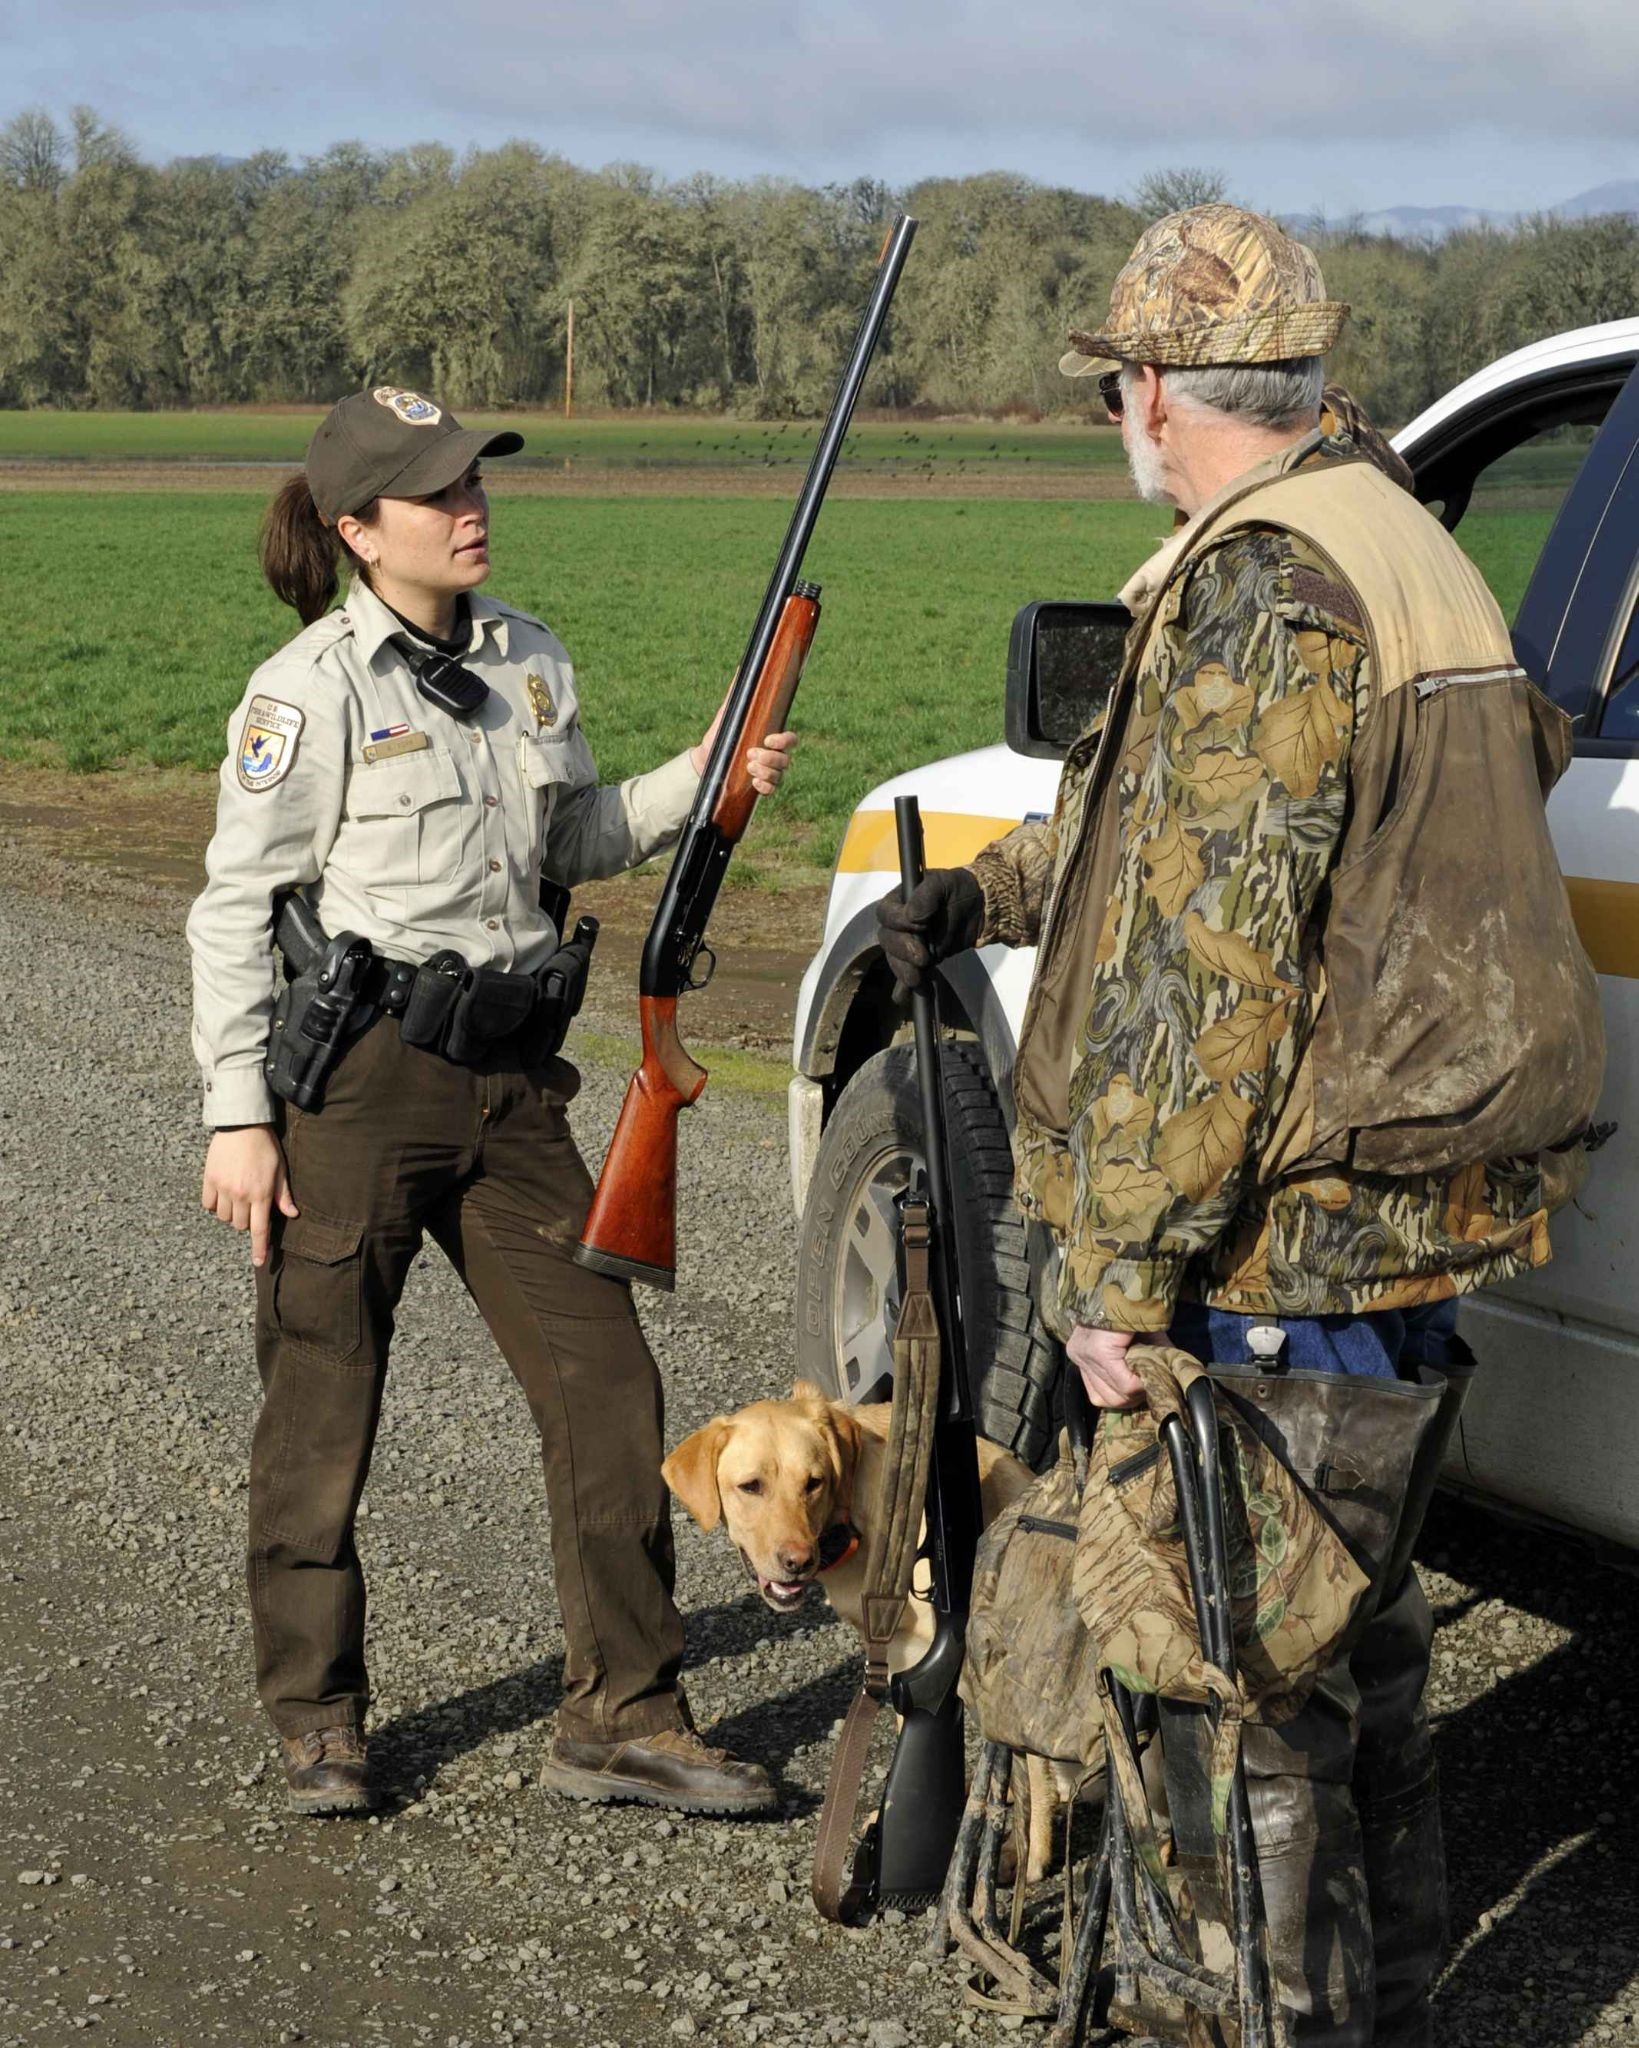 Conservation law enforcement officer talks with a hunter